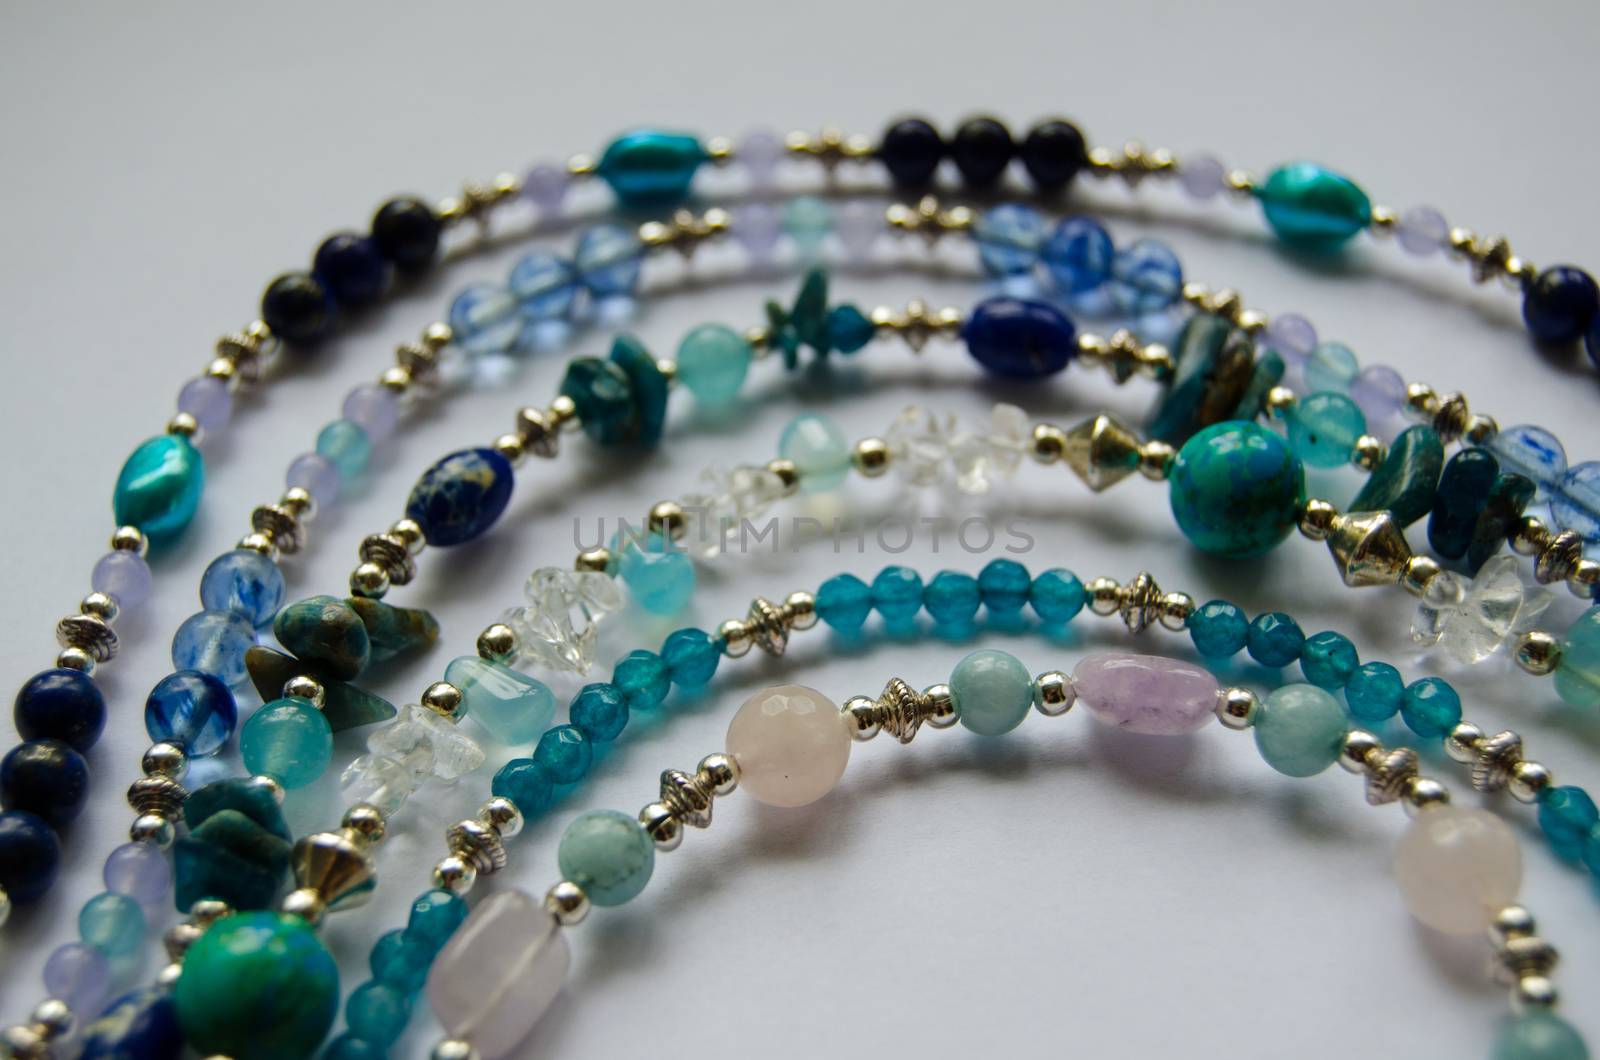 A selection of necklaces made from semi-precious gemstones including rose quartz, jasper, apatite, amethyst, lapis lazuli and pearls.  Various beads separated with silver plated beads.  